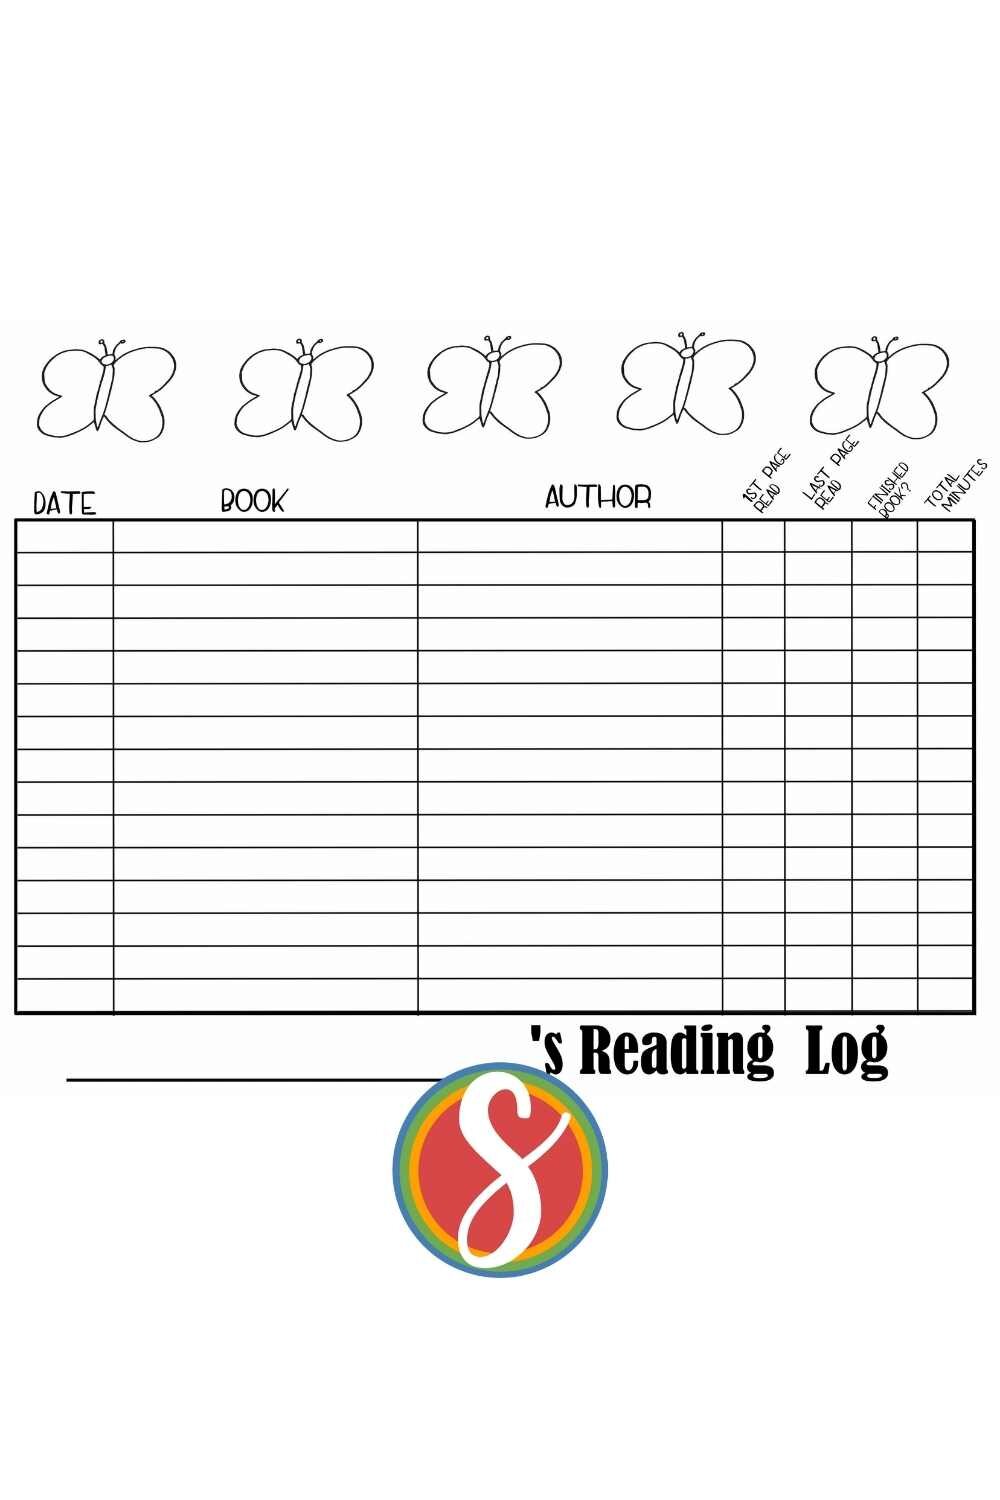 Free printable reading log to track your reading for your reading program - with butterflies from Stevie Doodles